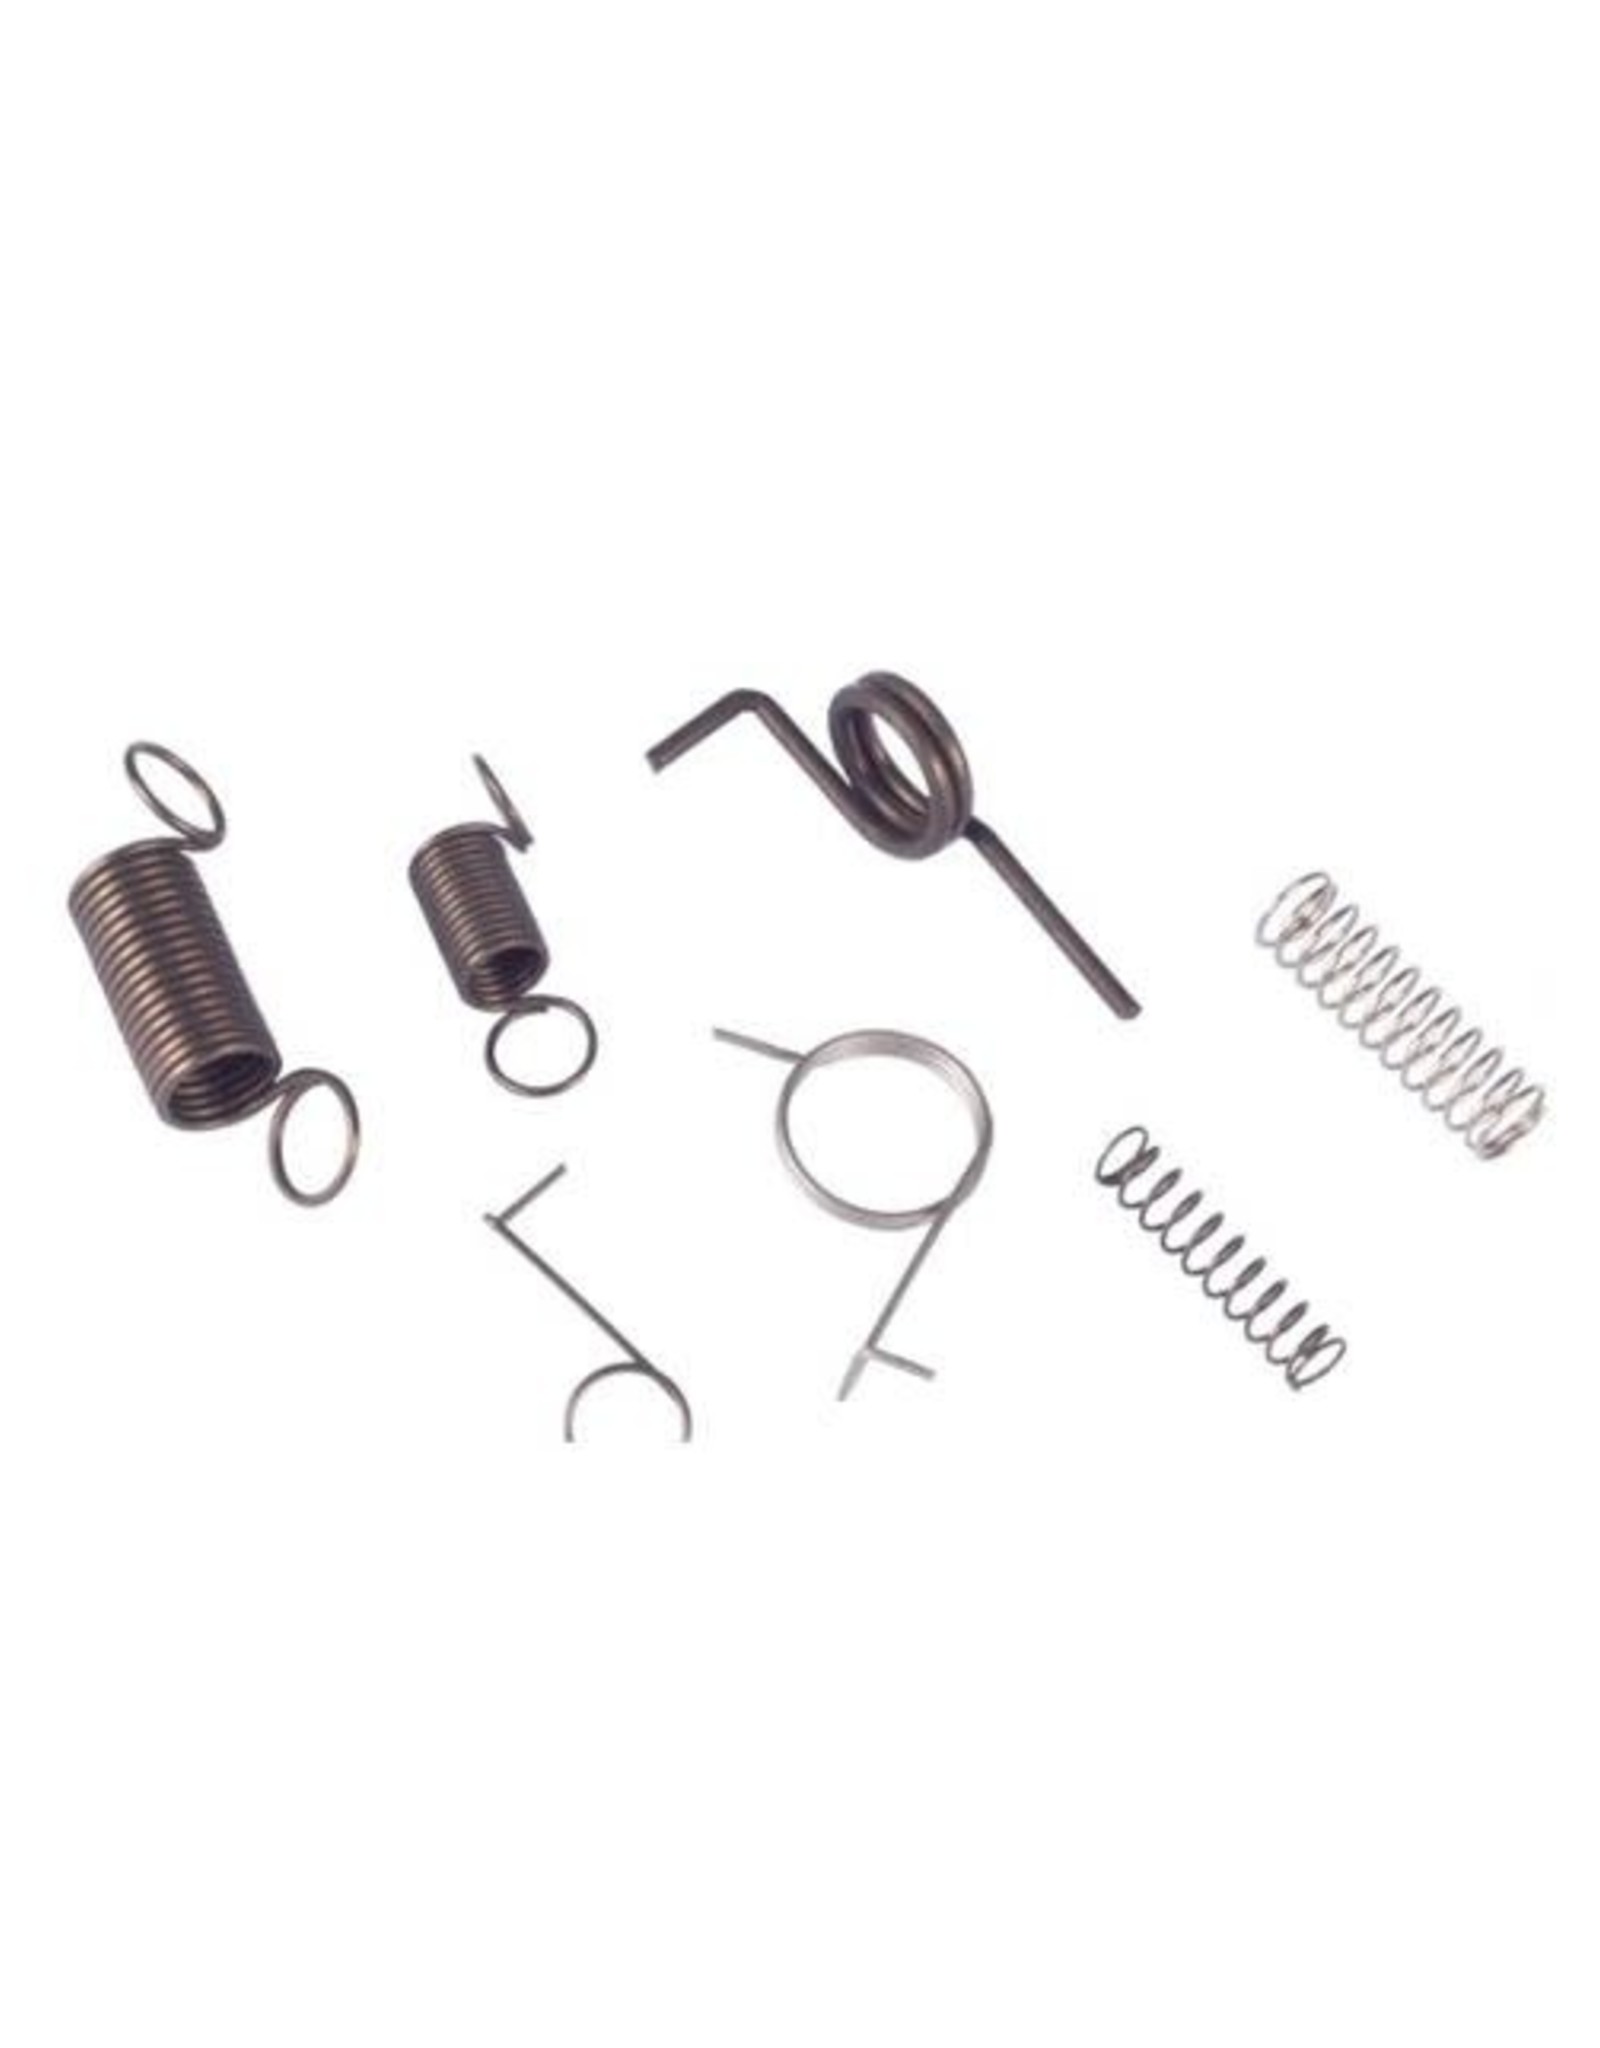 ASG ASG ULTIMATE Upgrade Spring Set for Airsoft AEG TM Ver.2 and Ver.3 Gearbox